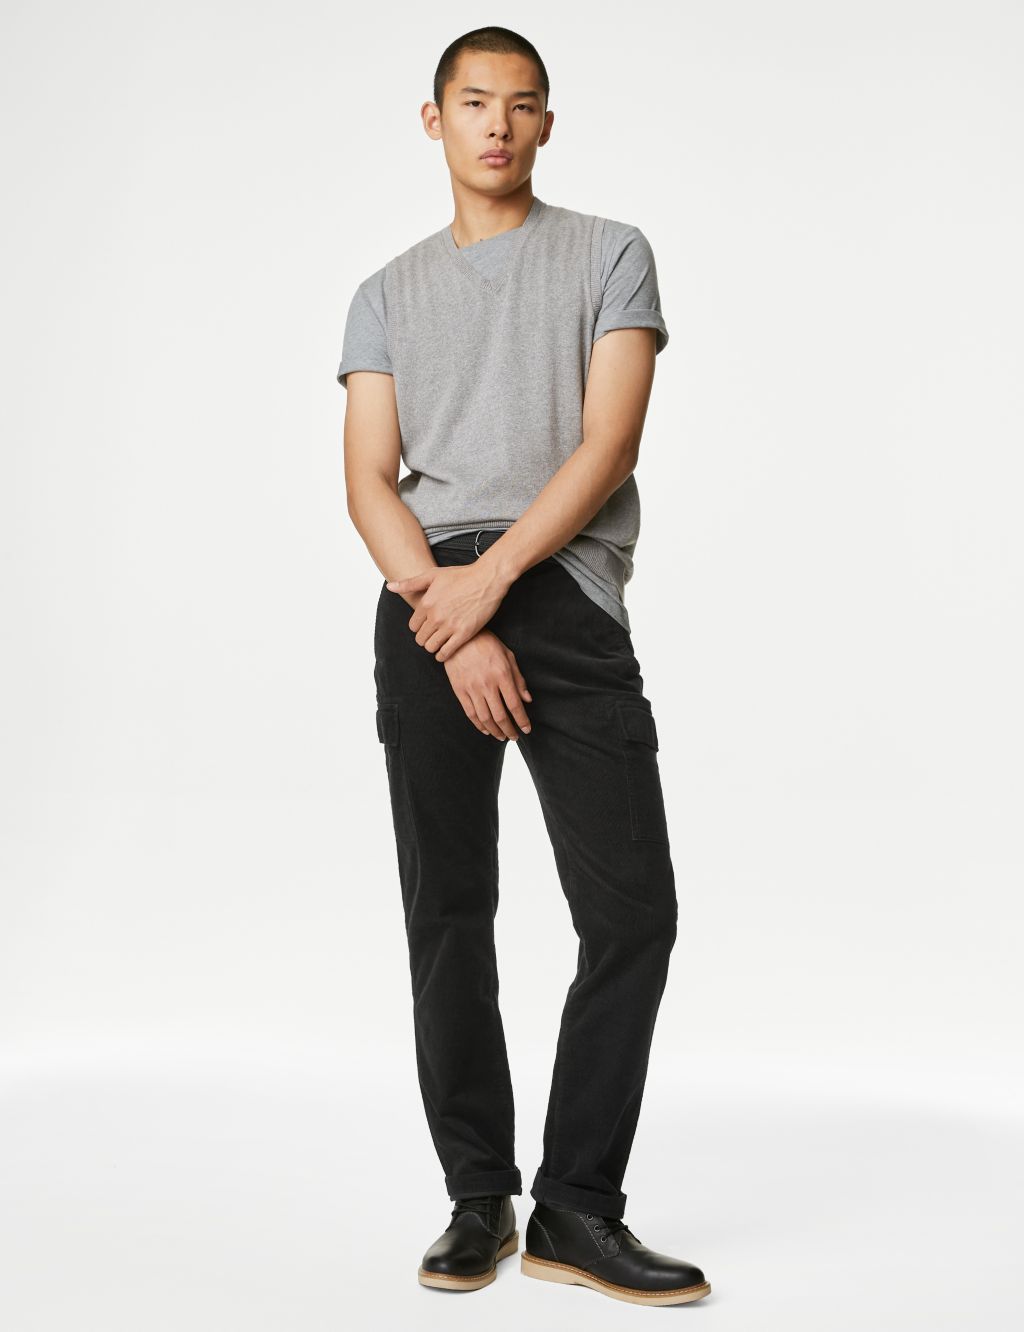 Straight Fit Corduroy Stretch Cargo Trousers image 1